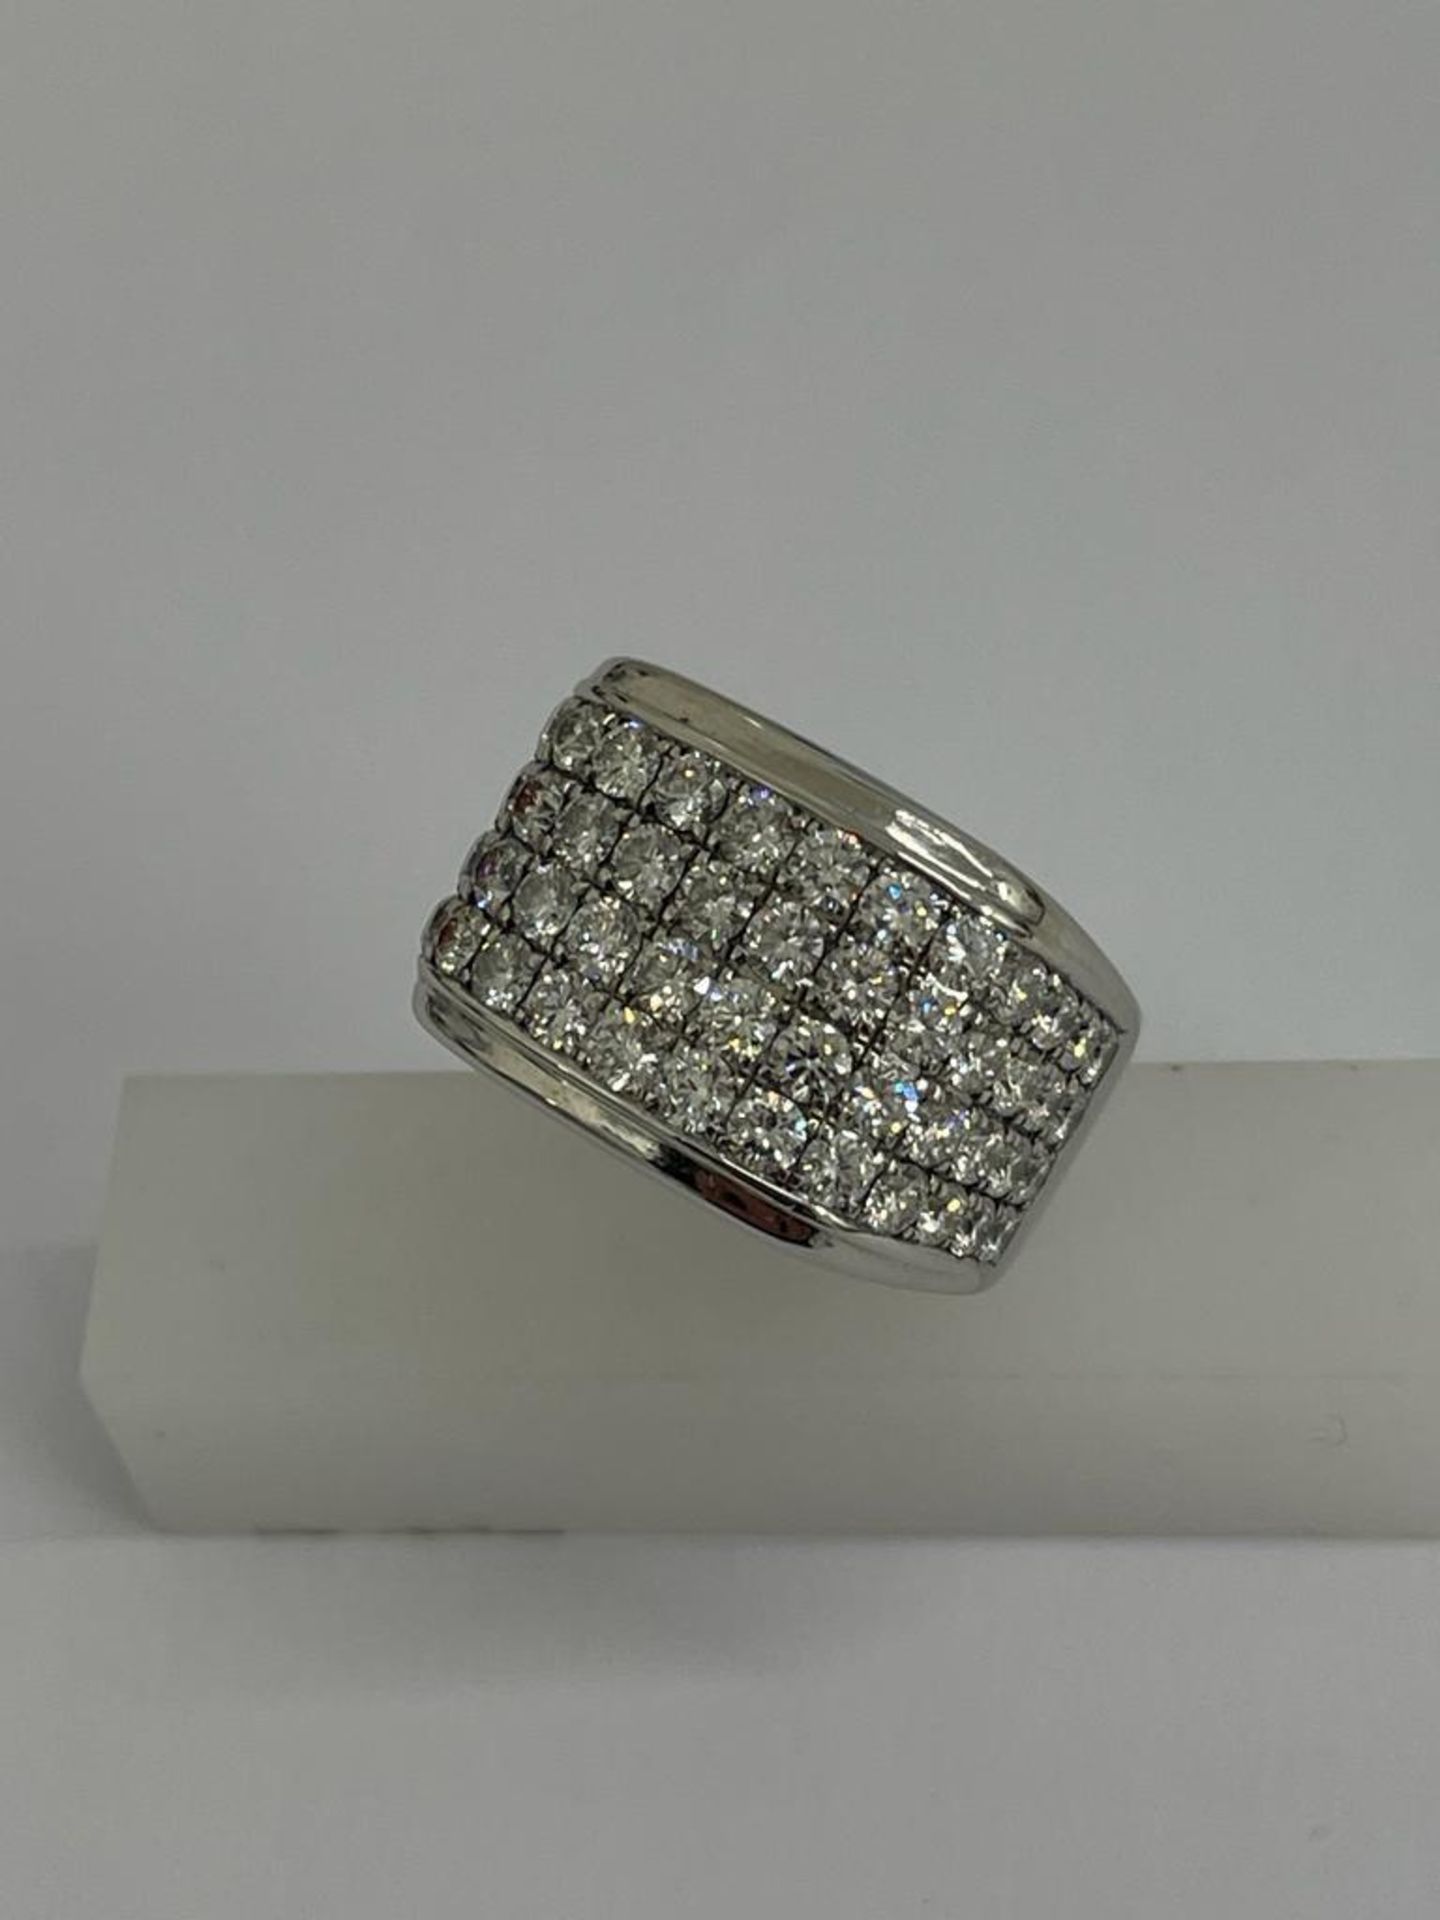 A GENTLEMAN'S 14 CARAT WHITE GOLD RING SET WITH APPROXIMATELY 5 CARATS OF BRILLIANT CUT DIAMONDS, - Image 2 of 8